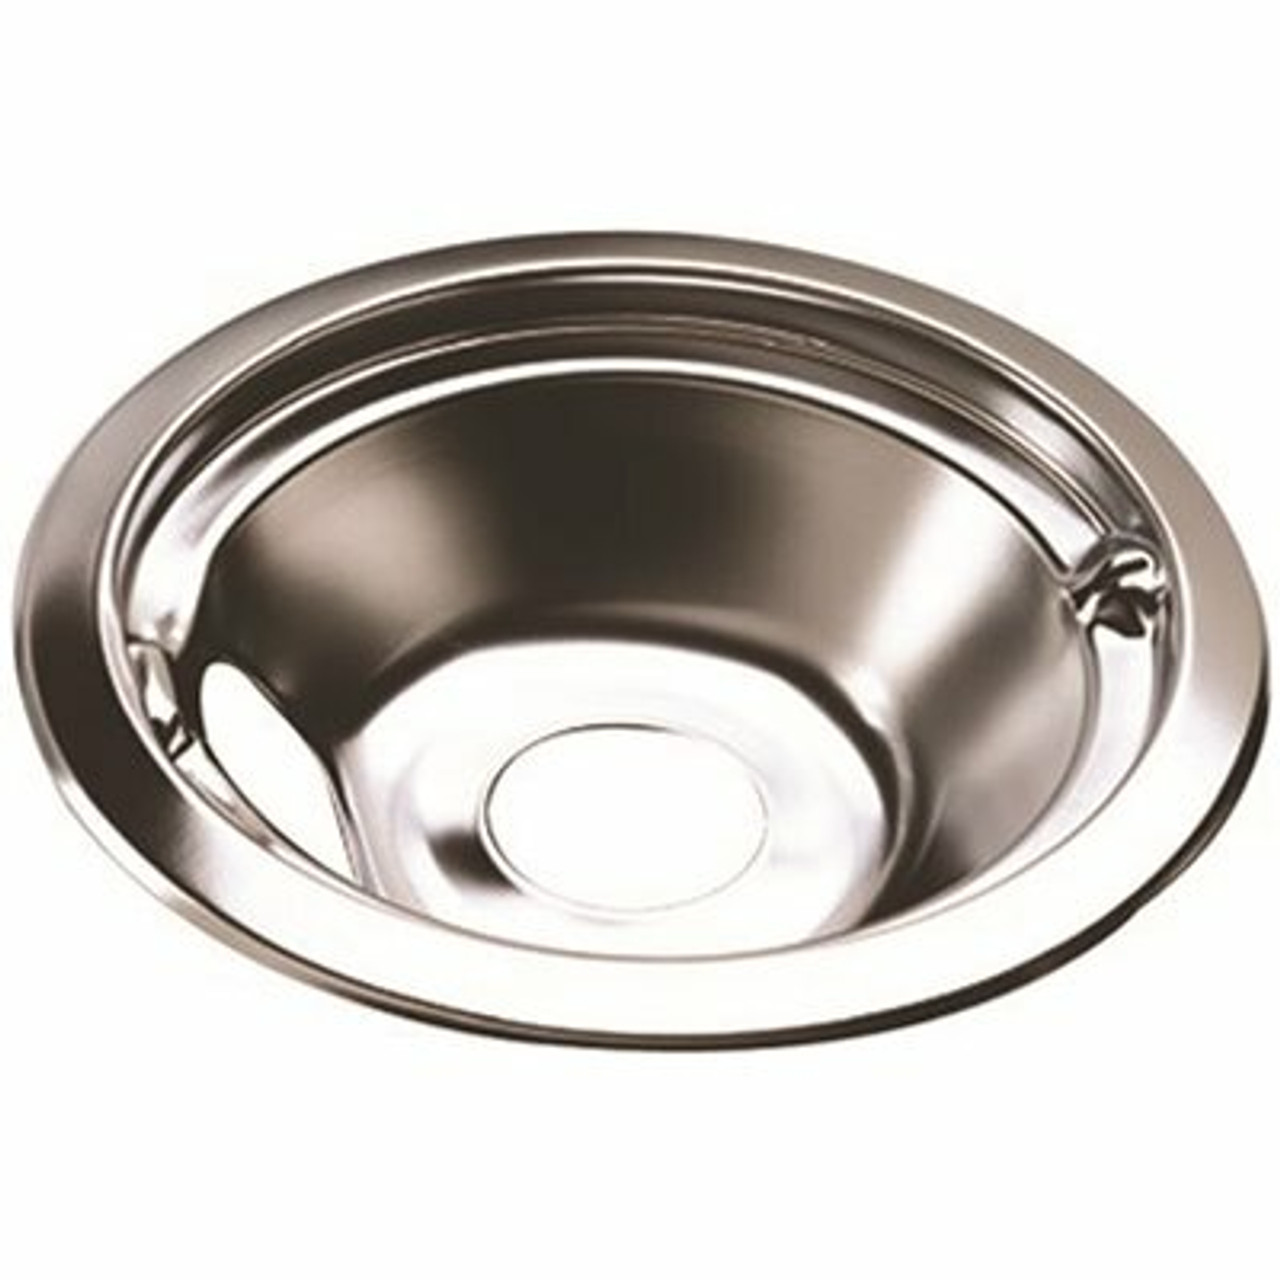 Electric Range Drip Pan Fits Whirlpool Ranges In Chrome, 6 In. (Pack Of 6)